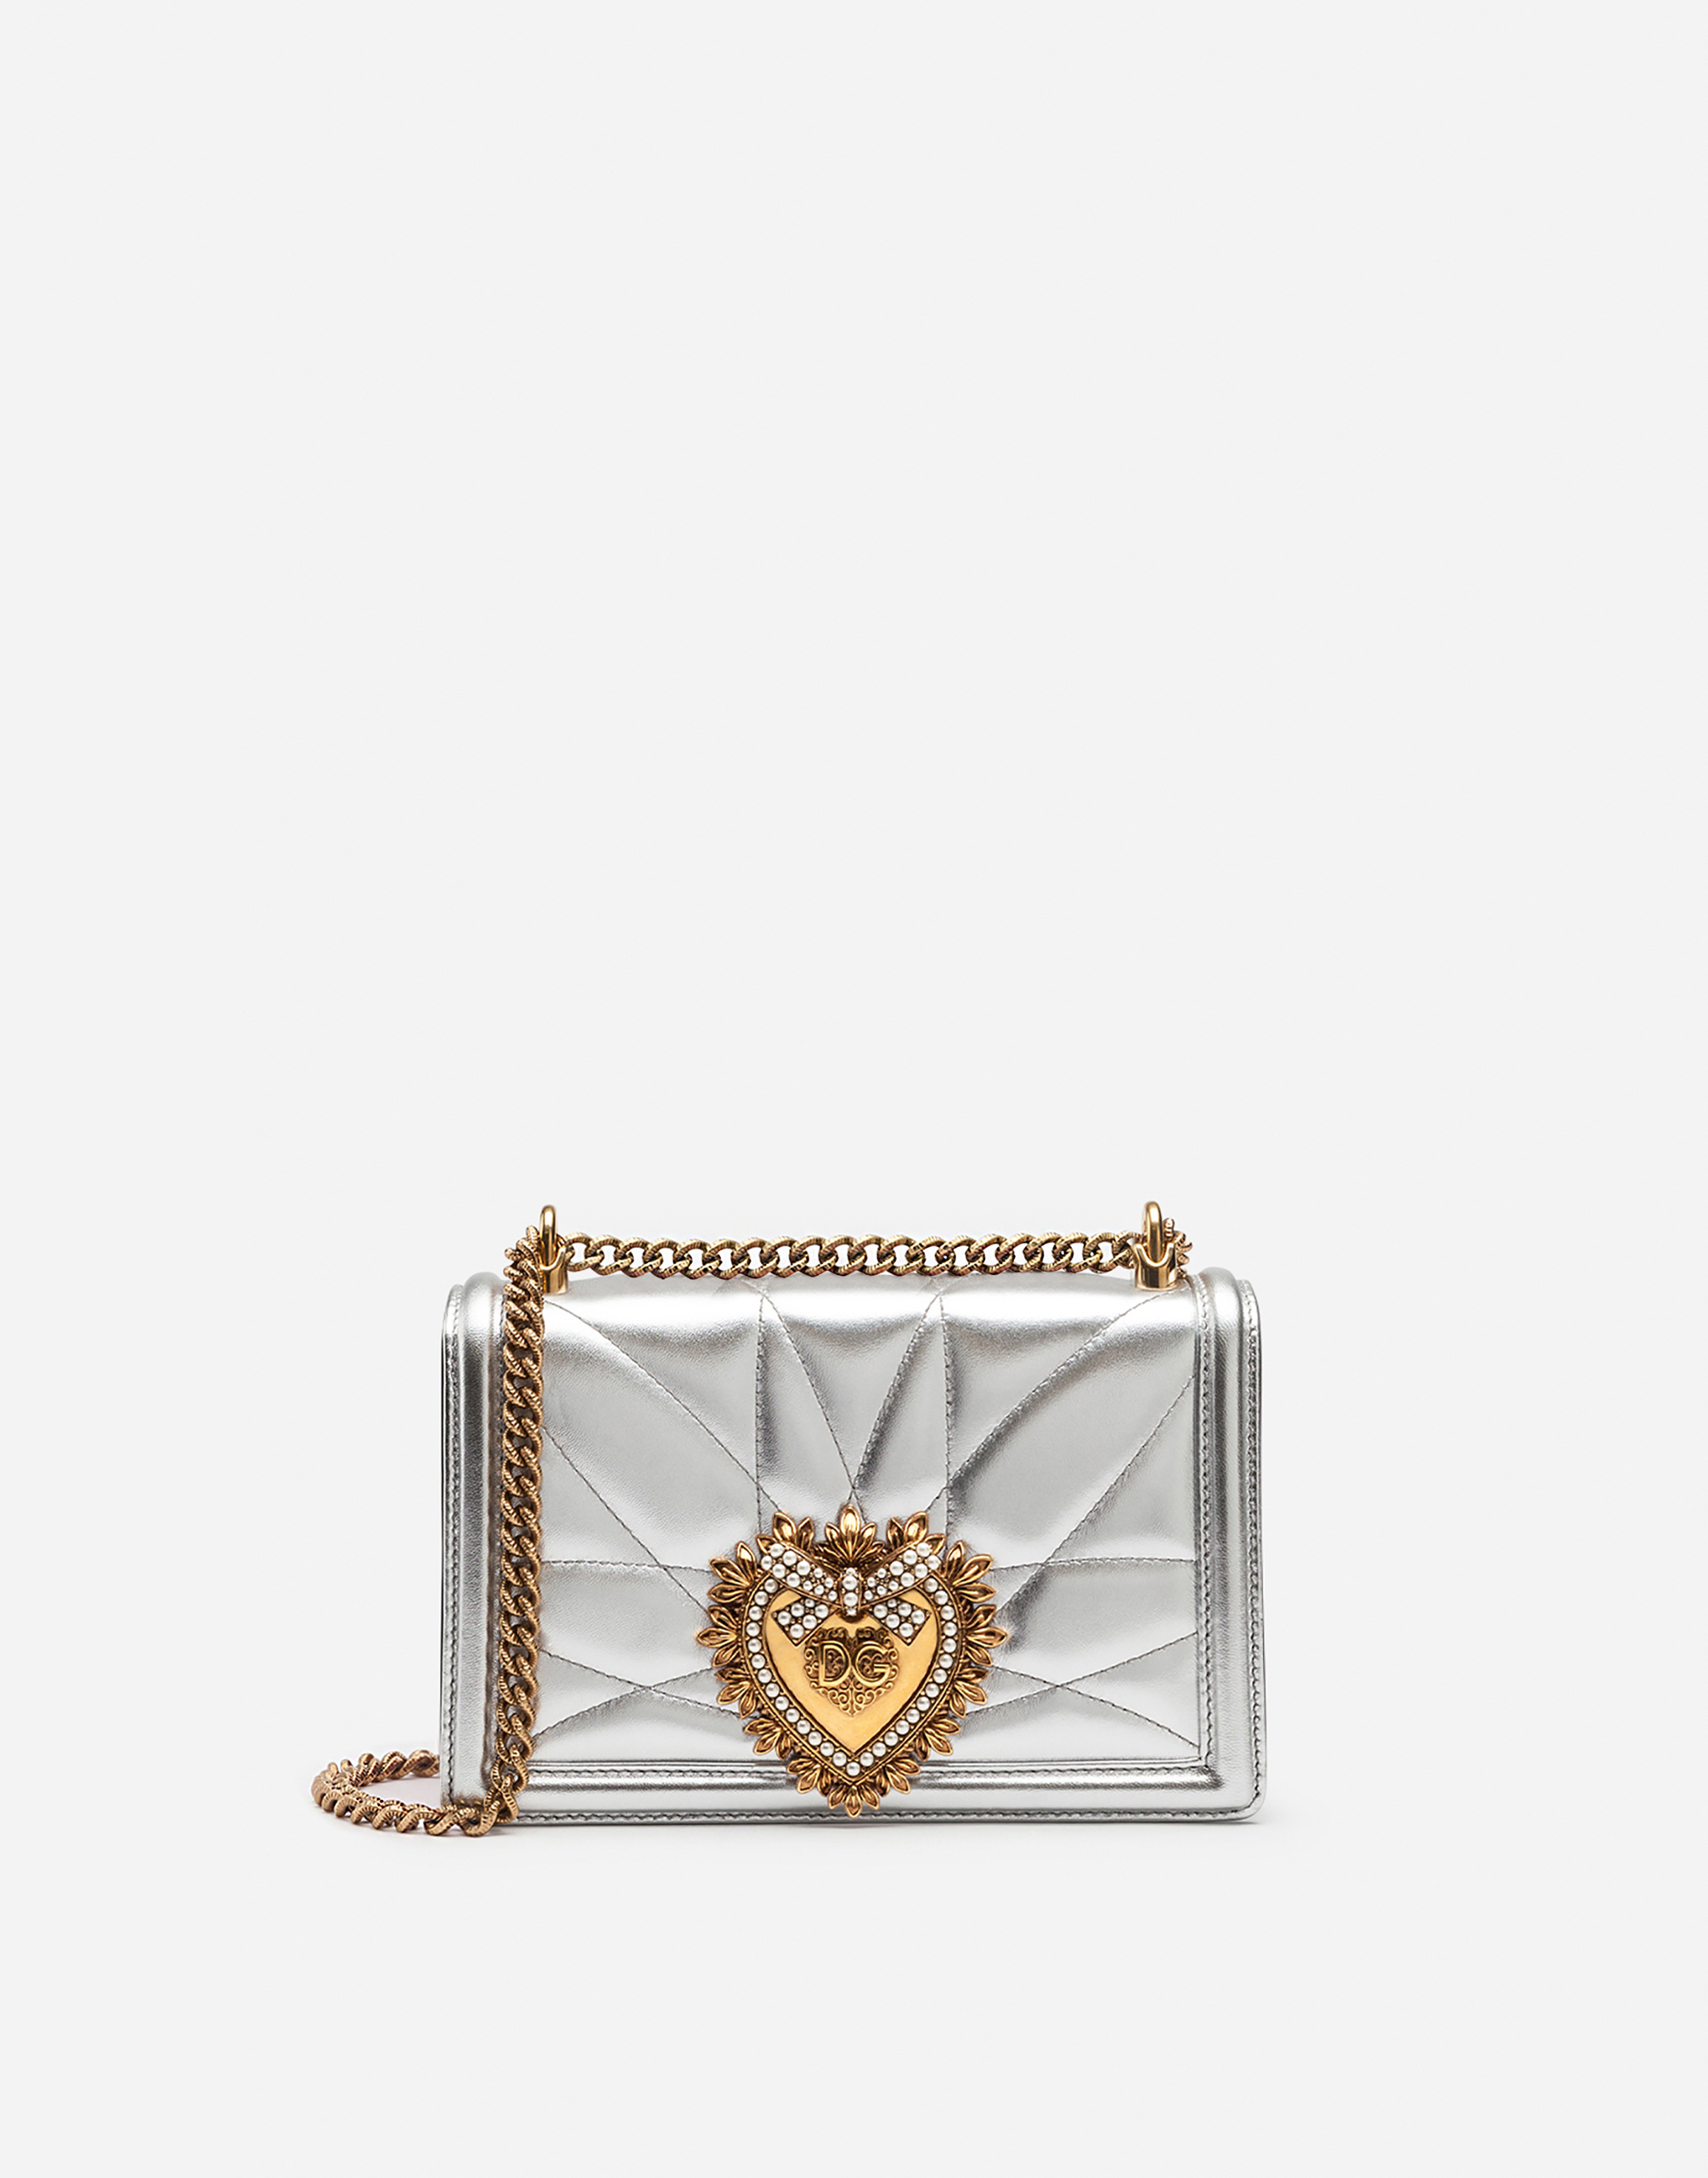 Medium Devotion crossbody bag in quilted nappa mordore leather in Silver